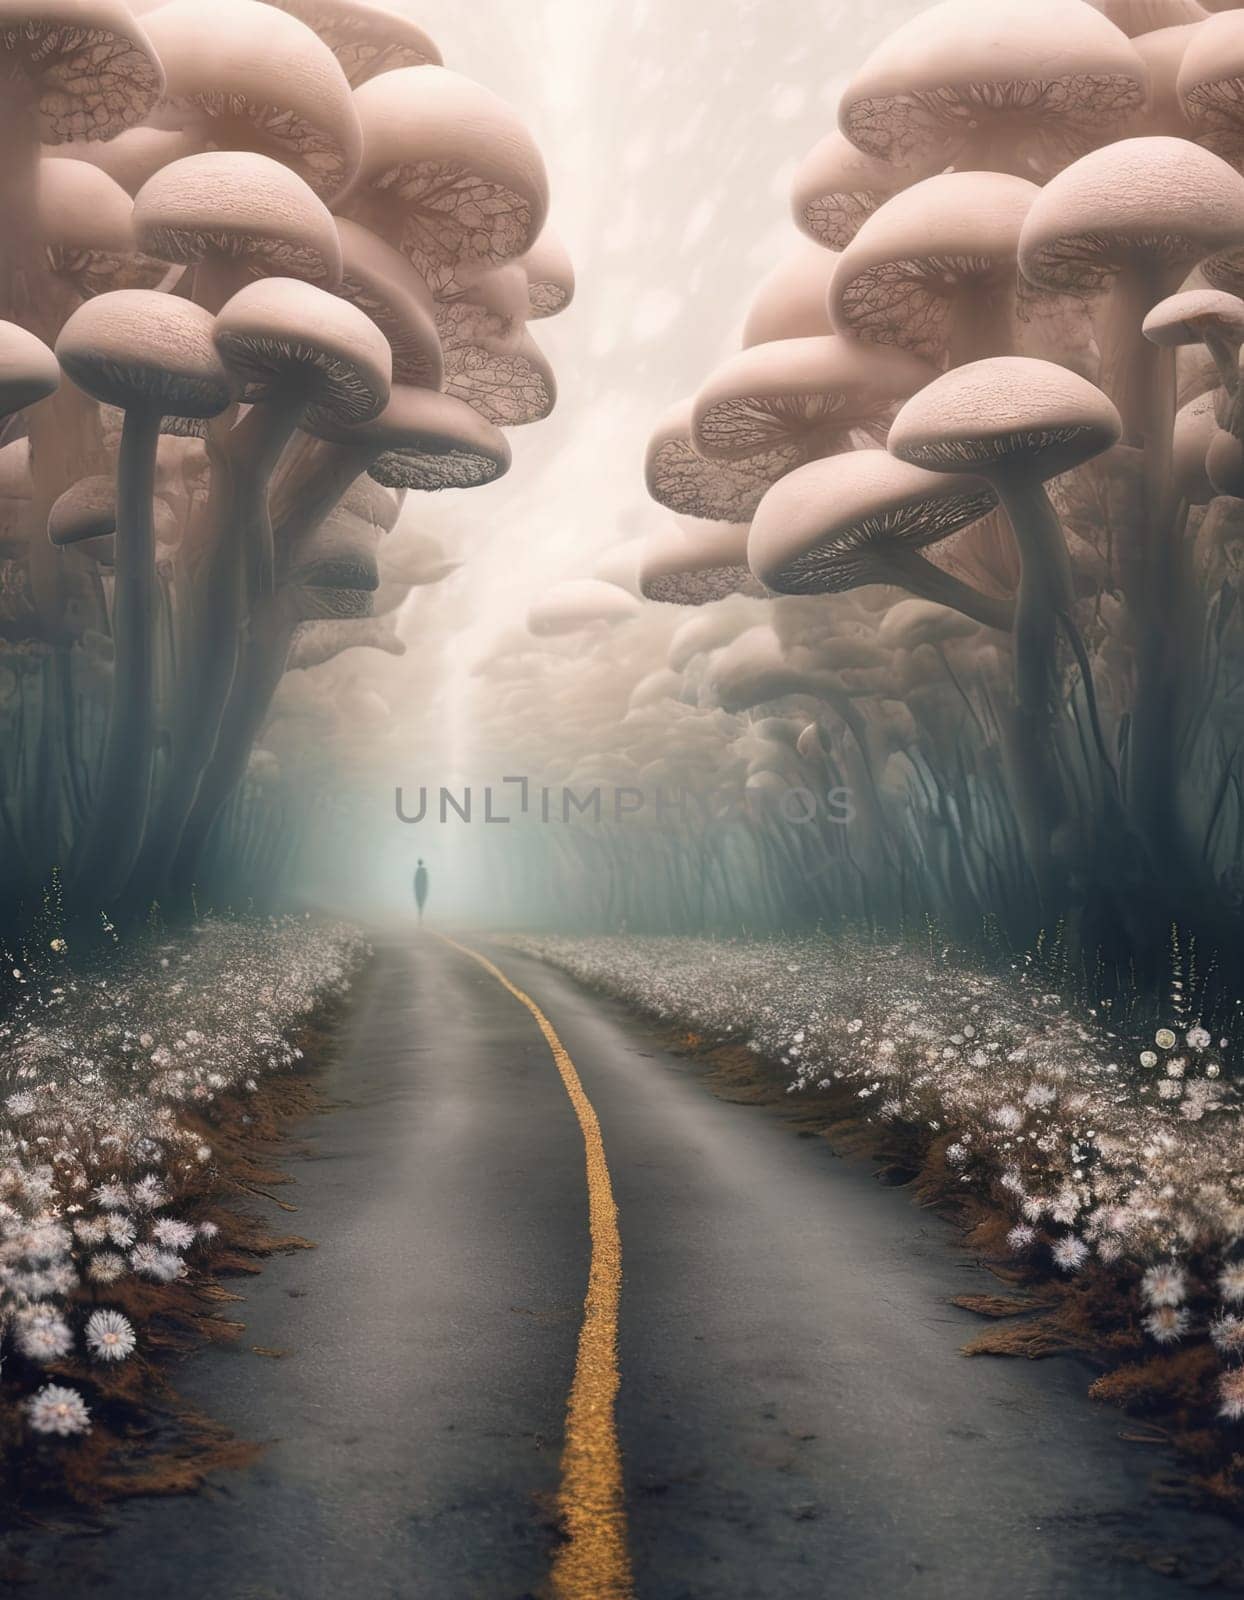 A person is walking down a road in a forest with mushrooms. The mushrooms are large and spread out, creating a surreal and dreamlike atmosphere